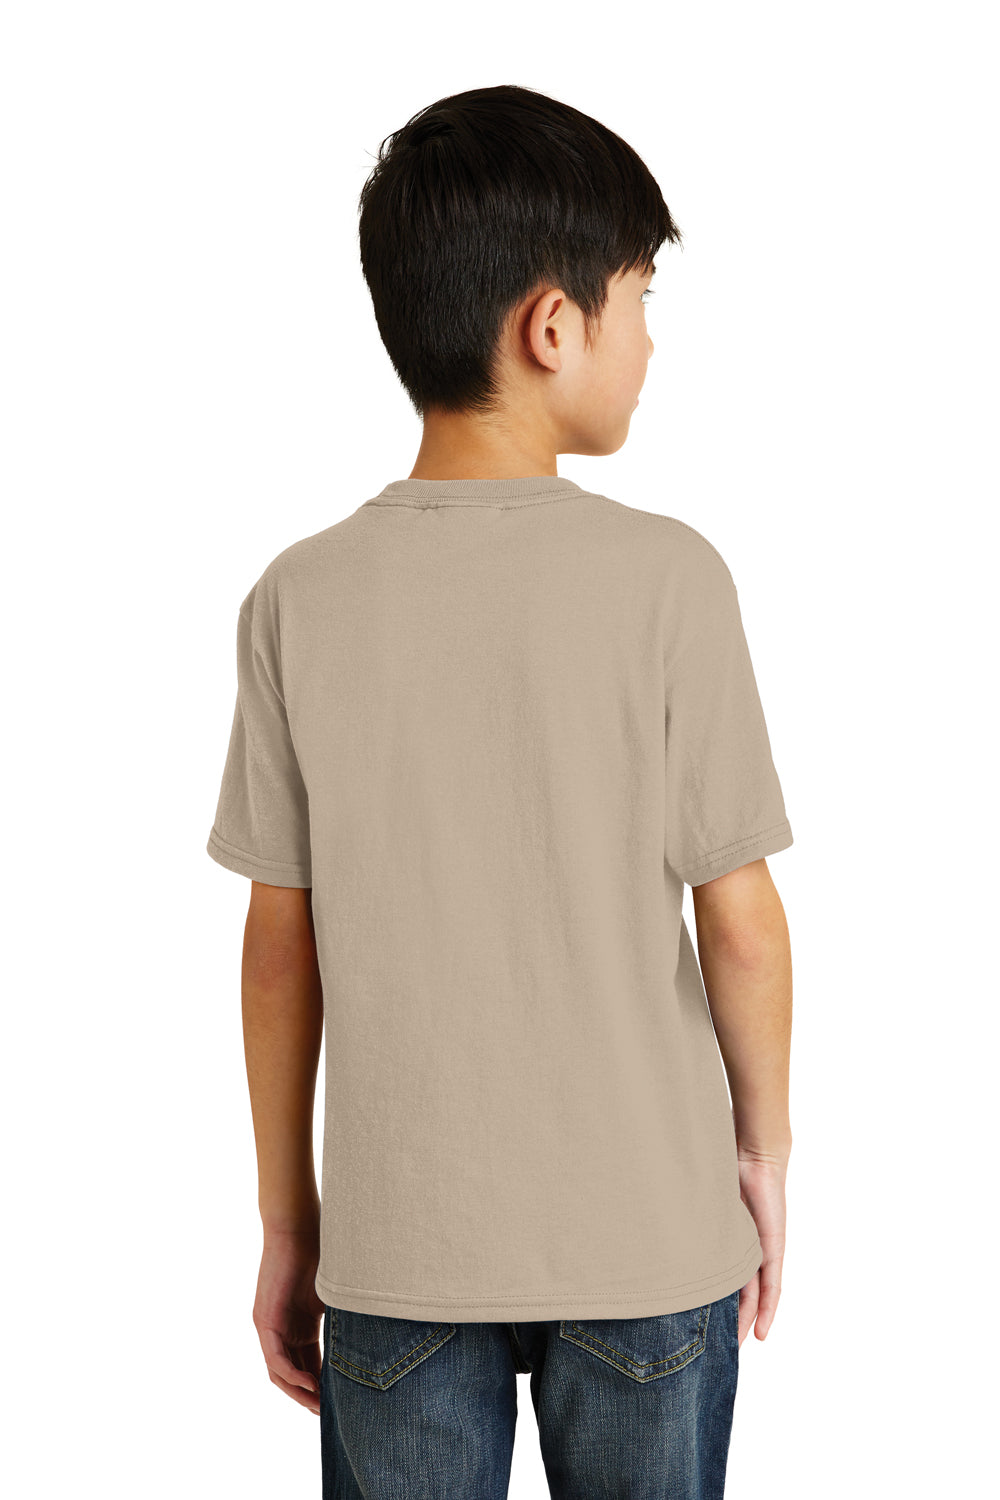 Port & Company PC55Y Youth Core Short Sleeve Crewneck T-Shirt Sand Brown Back